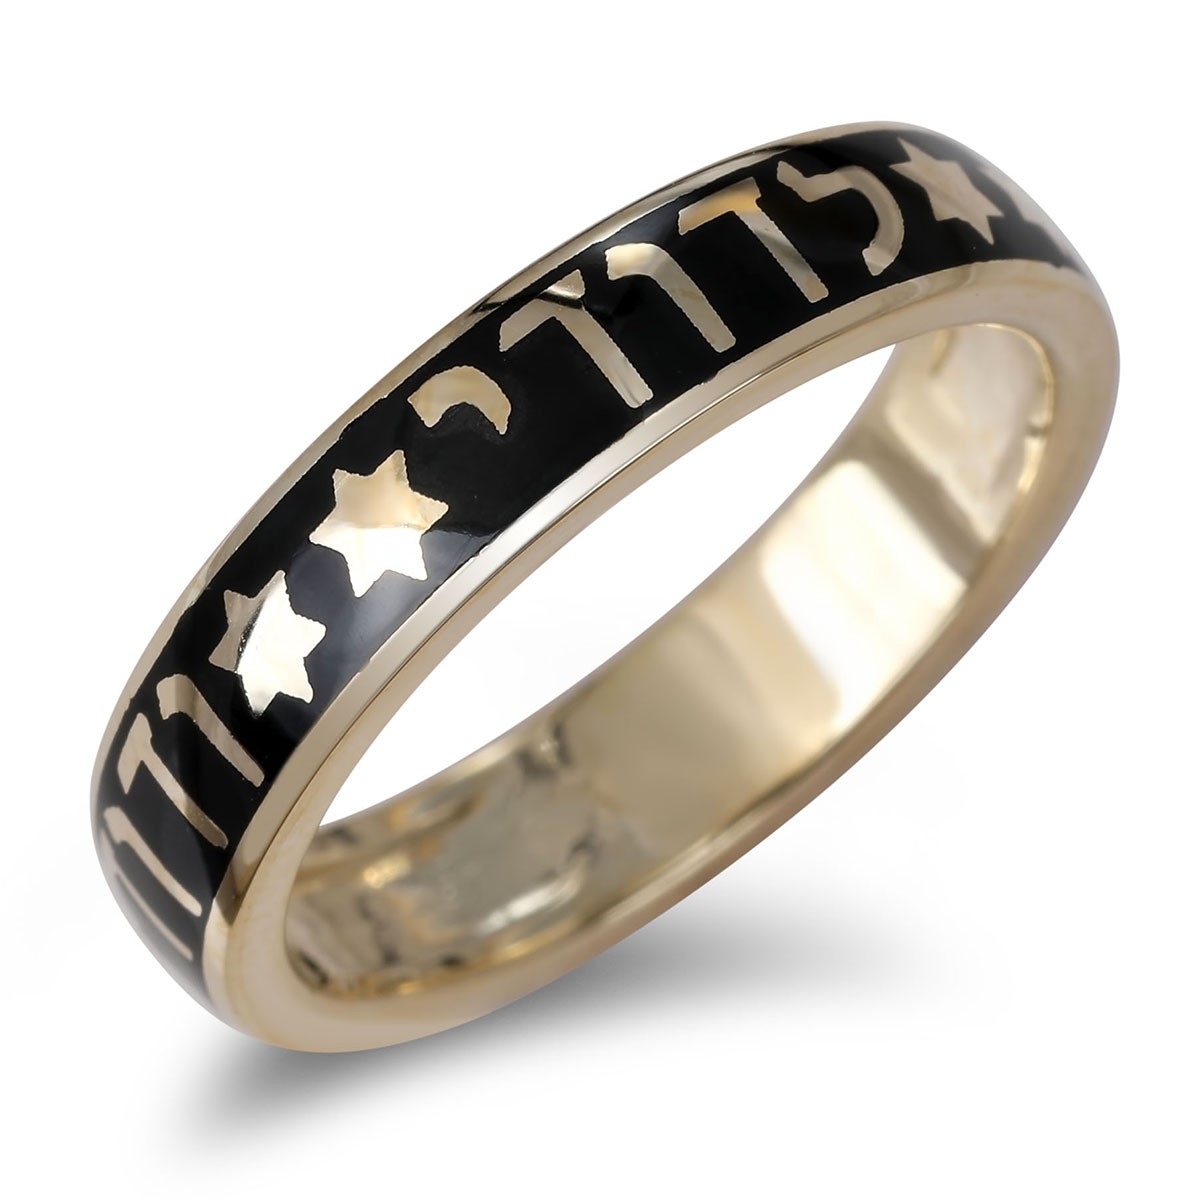 14K Gold and Black Enamel My Beloved Ring with Stars of David - 1